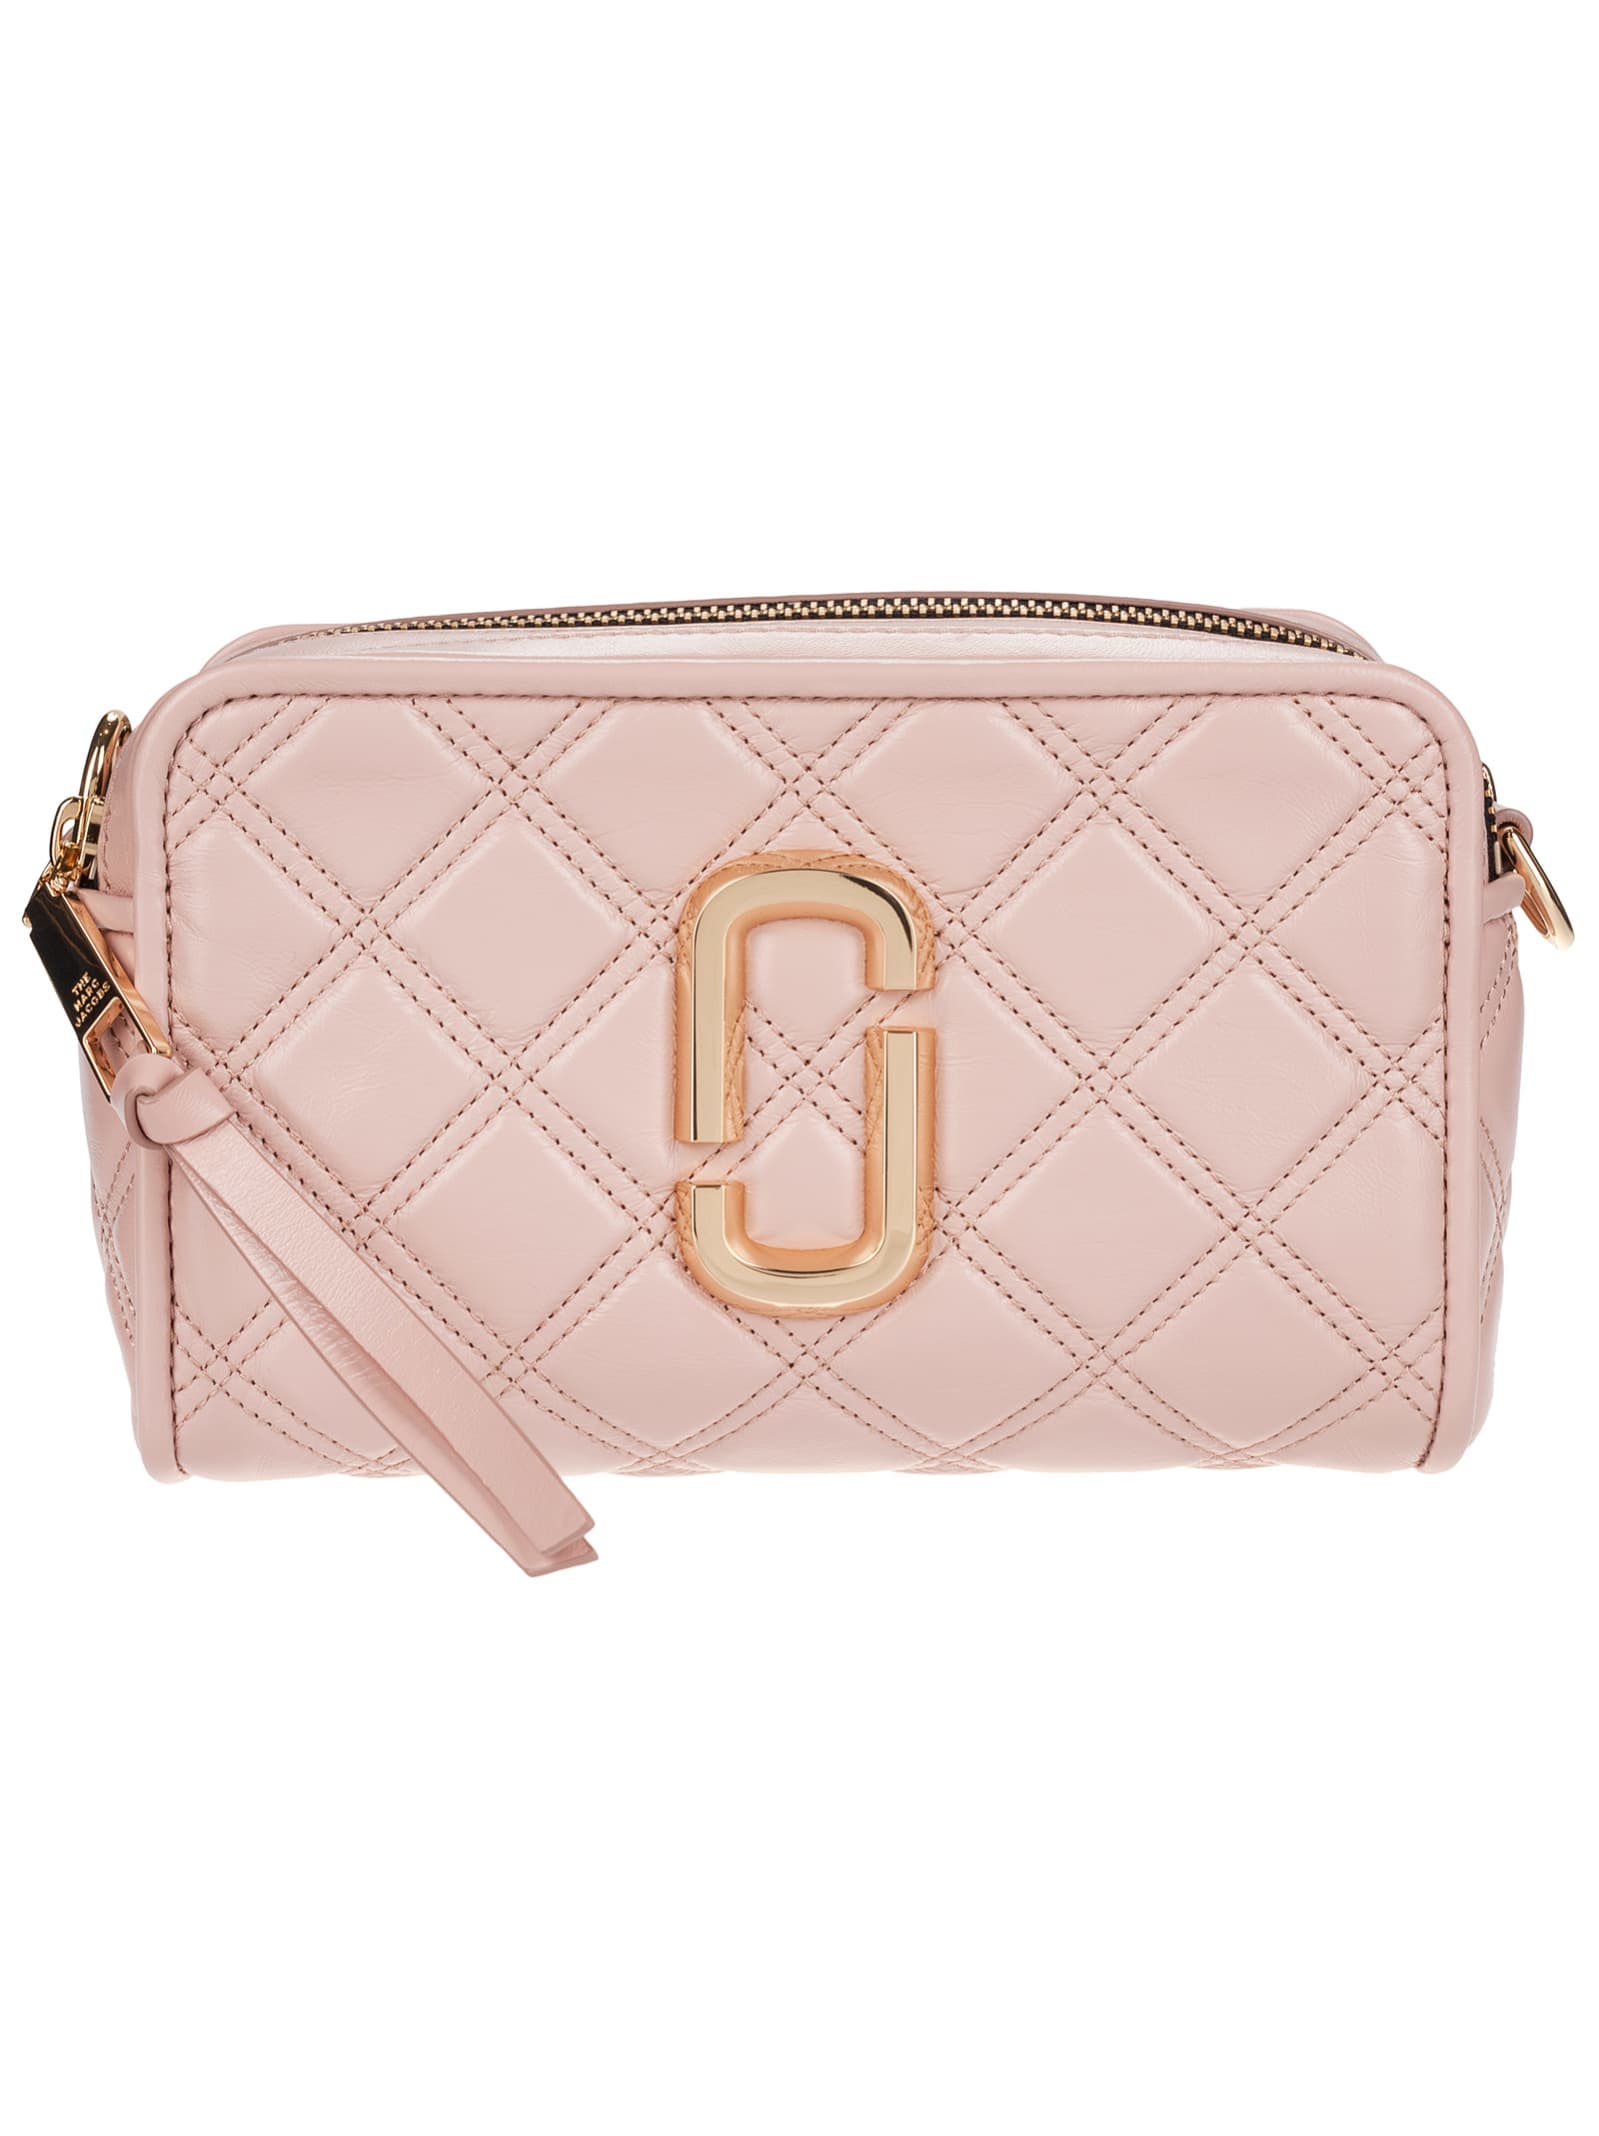 MARC JACOBS QUILTED LOGO PLAQUE CAMERA BAG,11308410